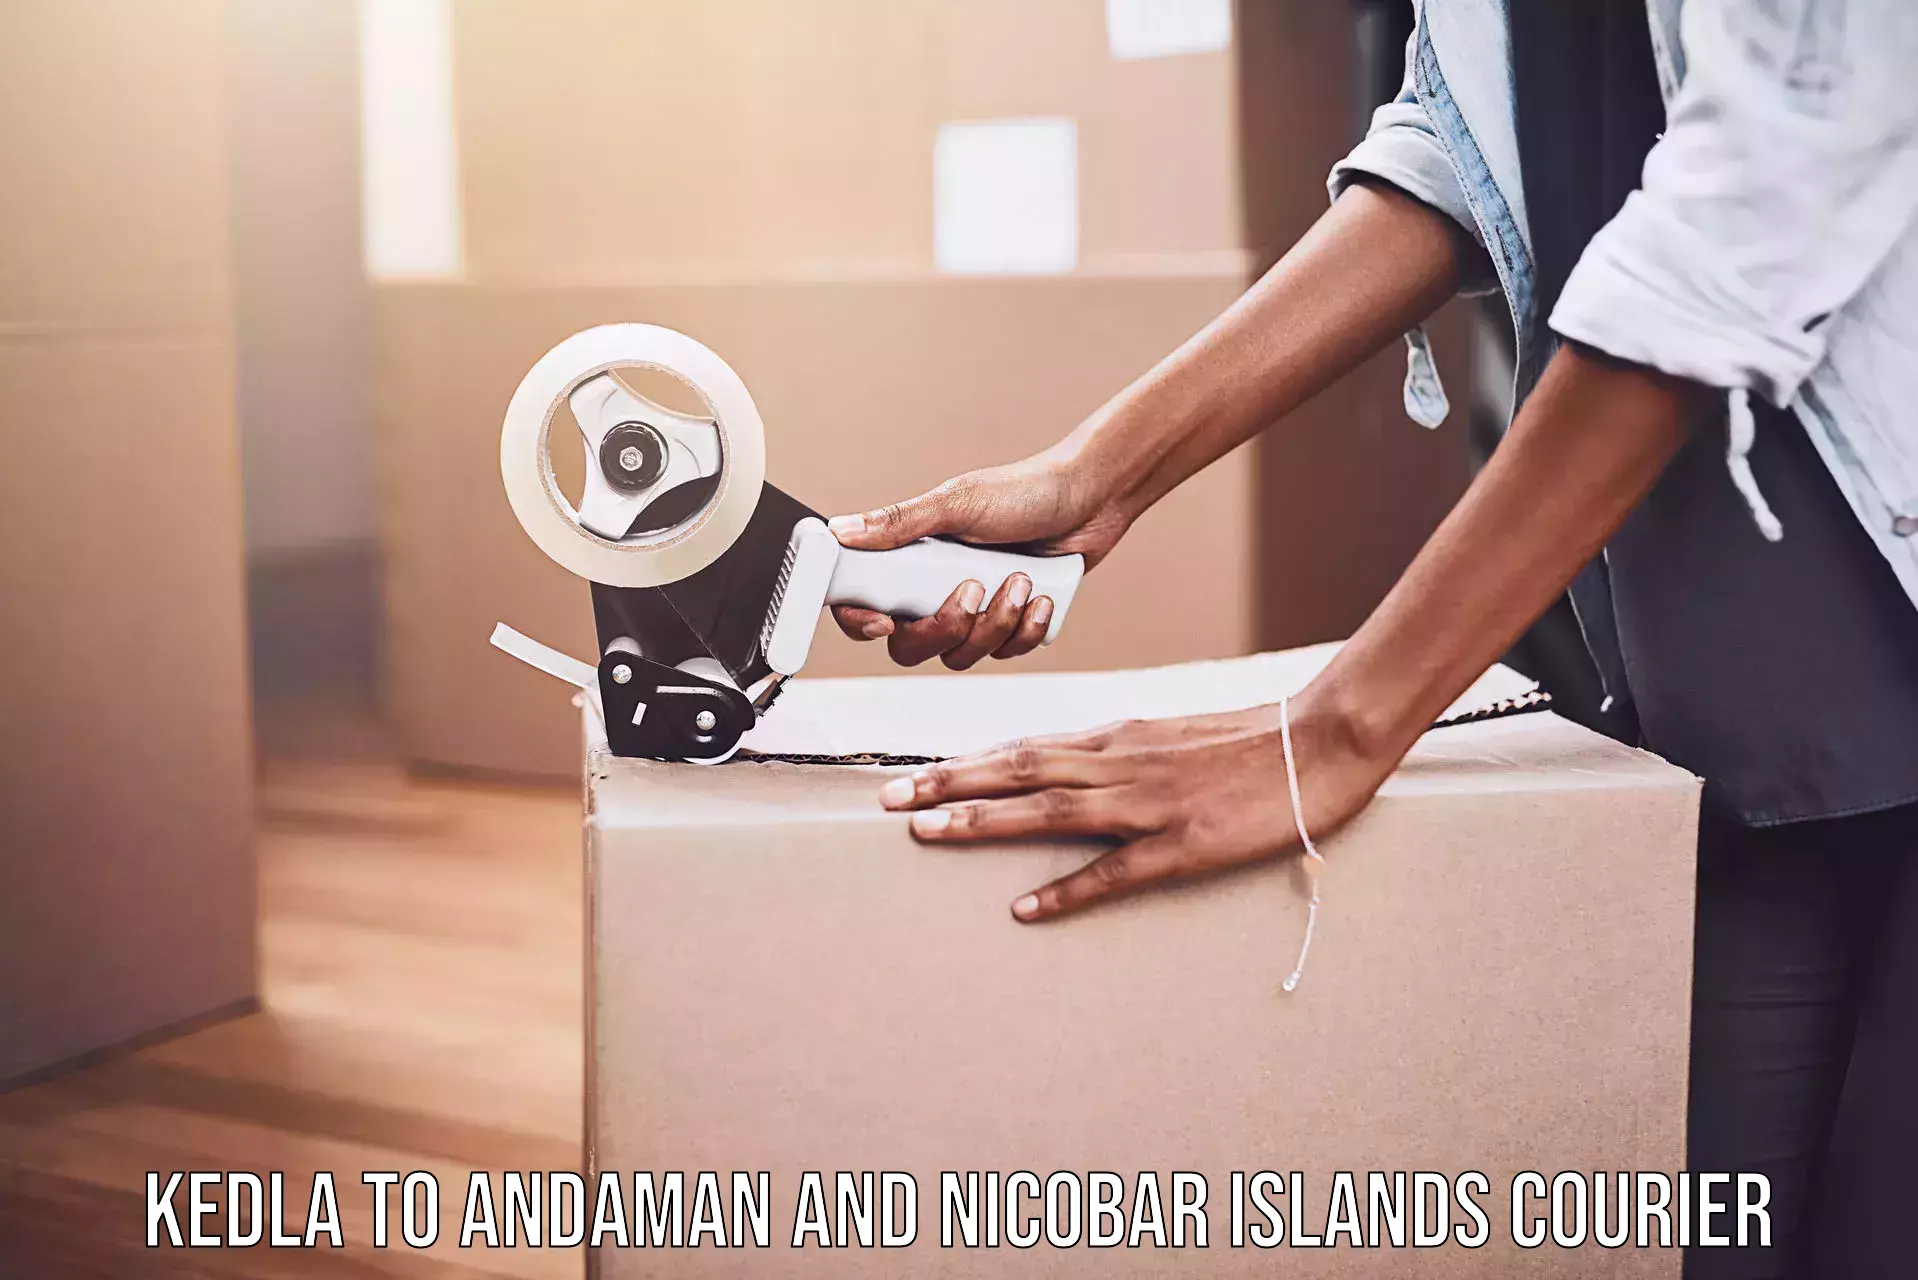 Professional courier handling in Kedla to Andaman and Nicobar Islands